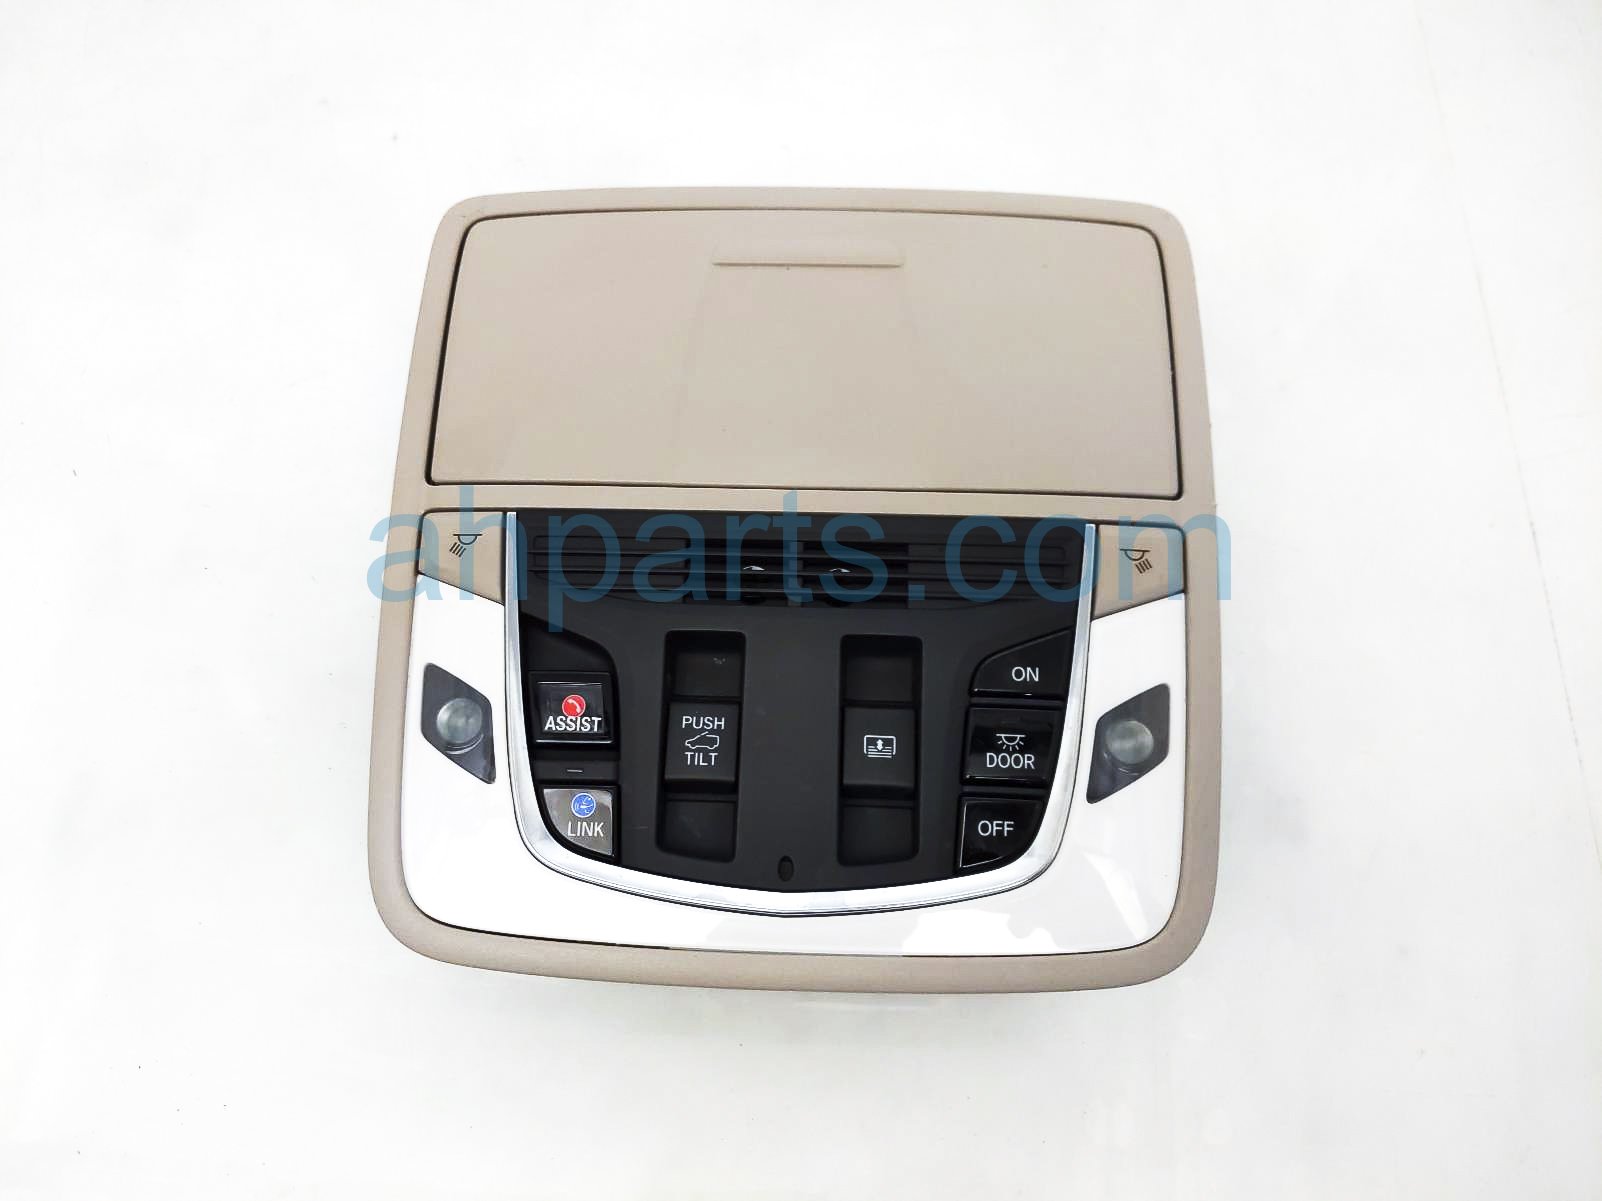 $75 Acura MAP LIGHT / ROOF CONSOLE - GREY